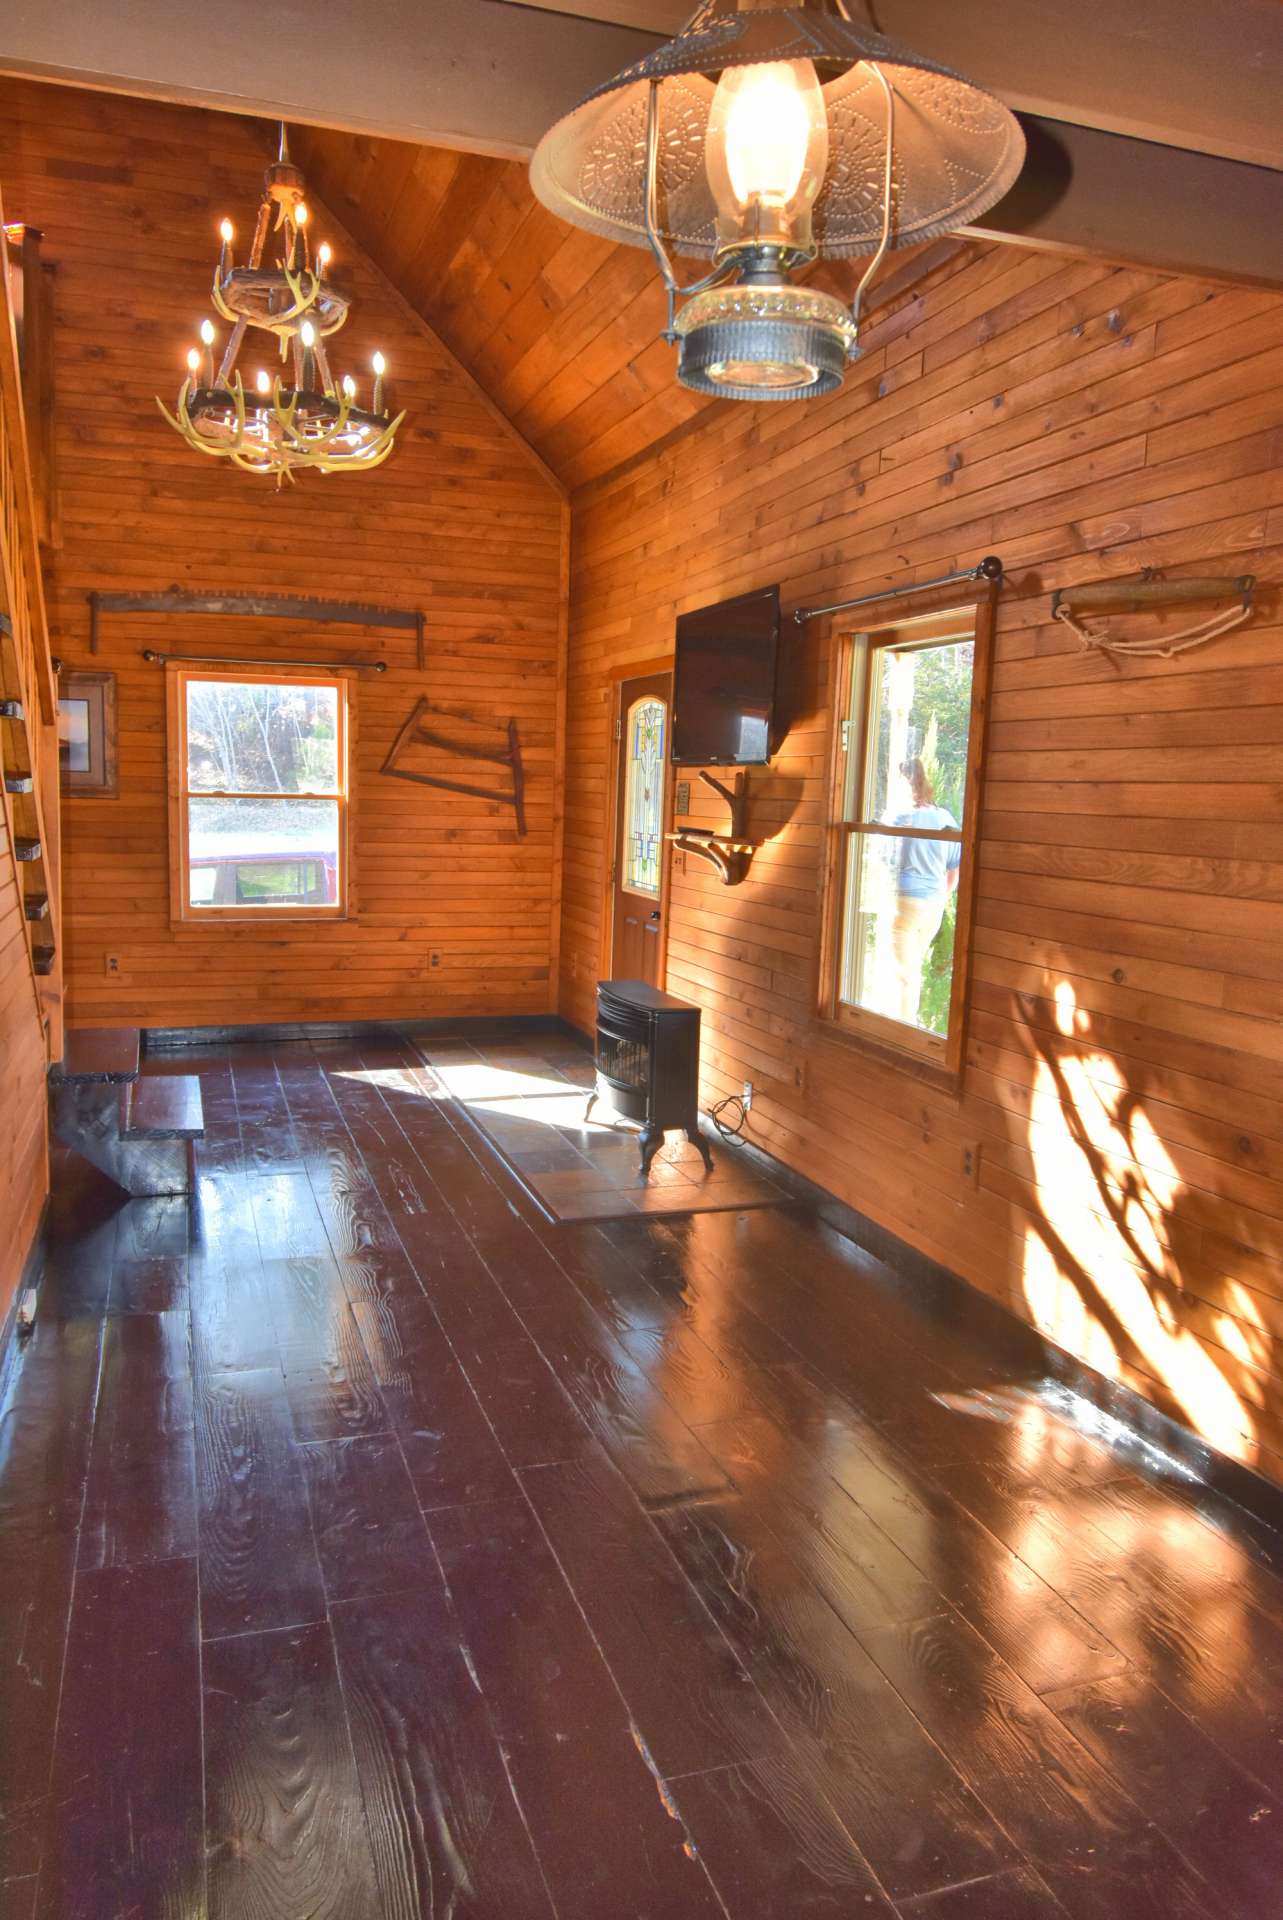 A gas log stove fills this cabin with warmth and ambiance on cool winter evenings.